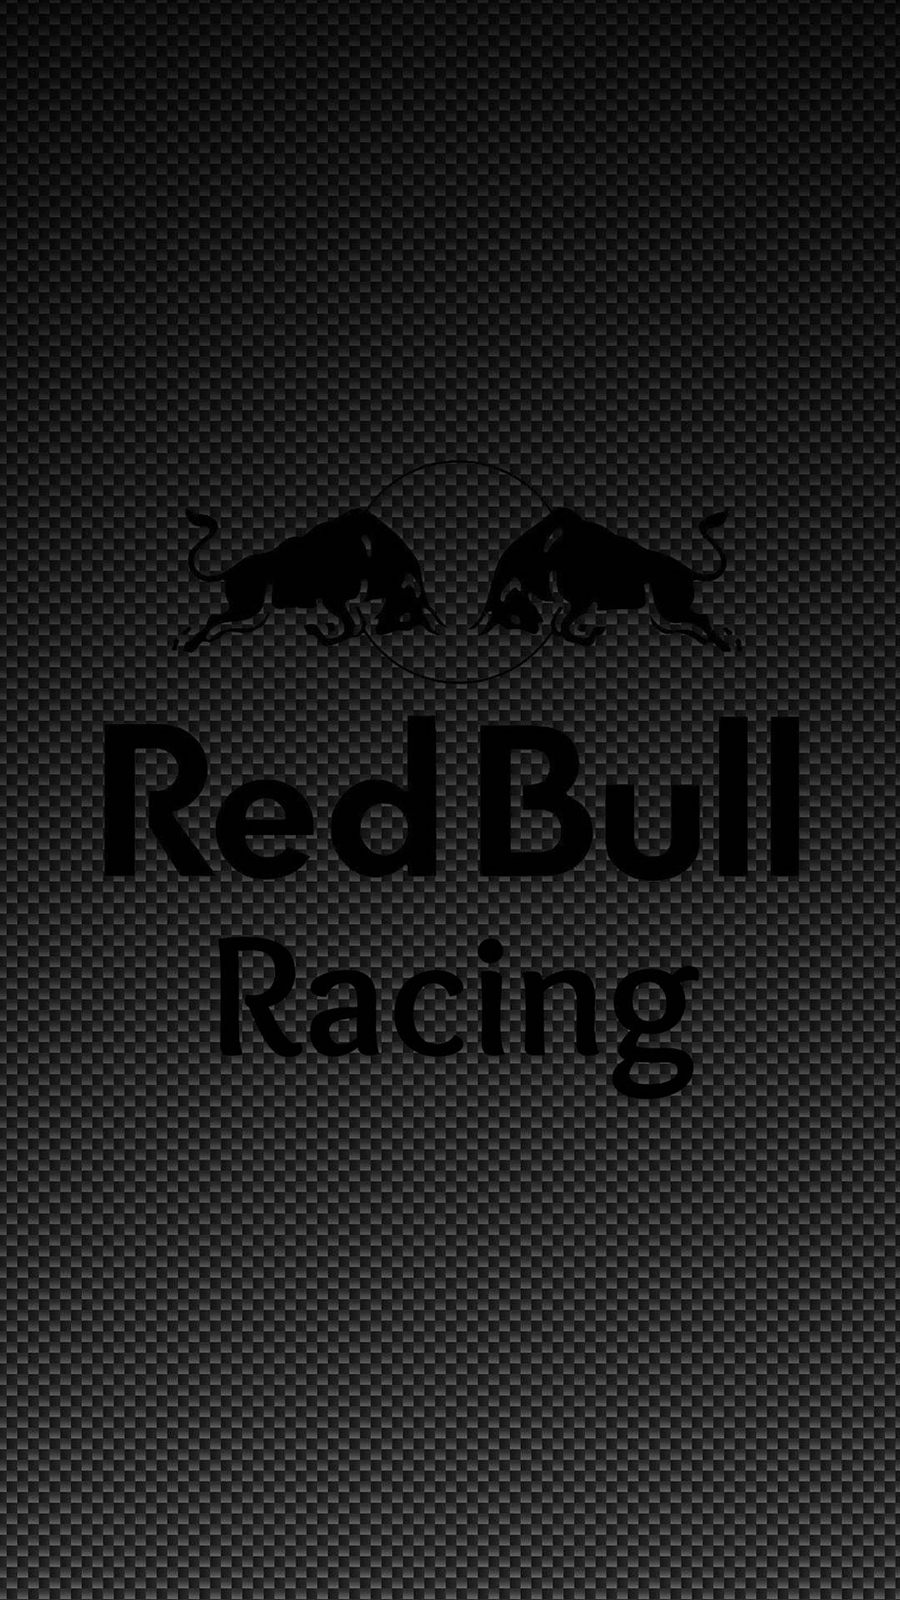 Red Bull Racing Full HD Wallpapers Now Download